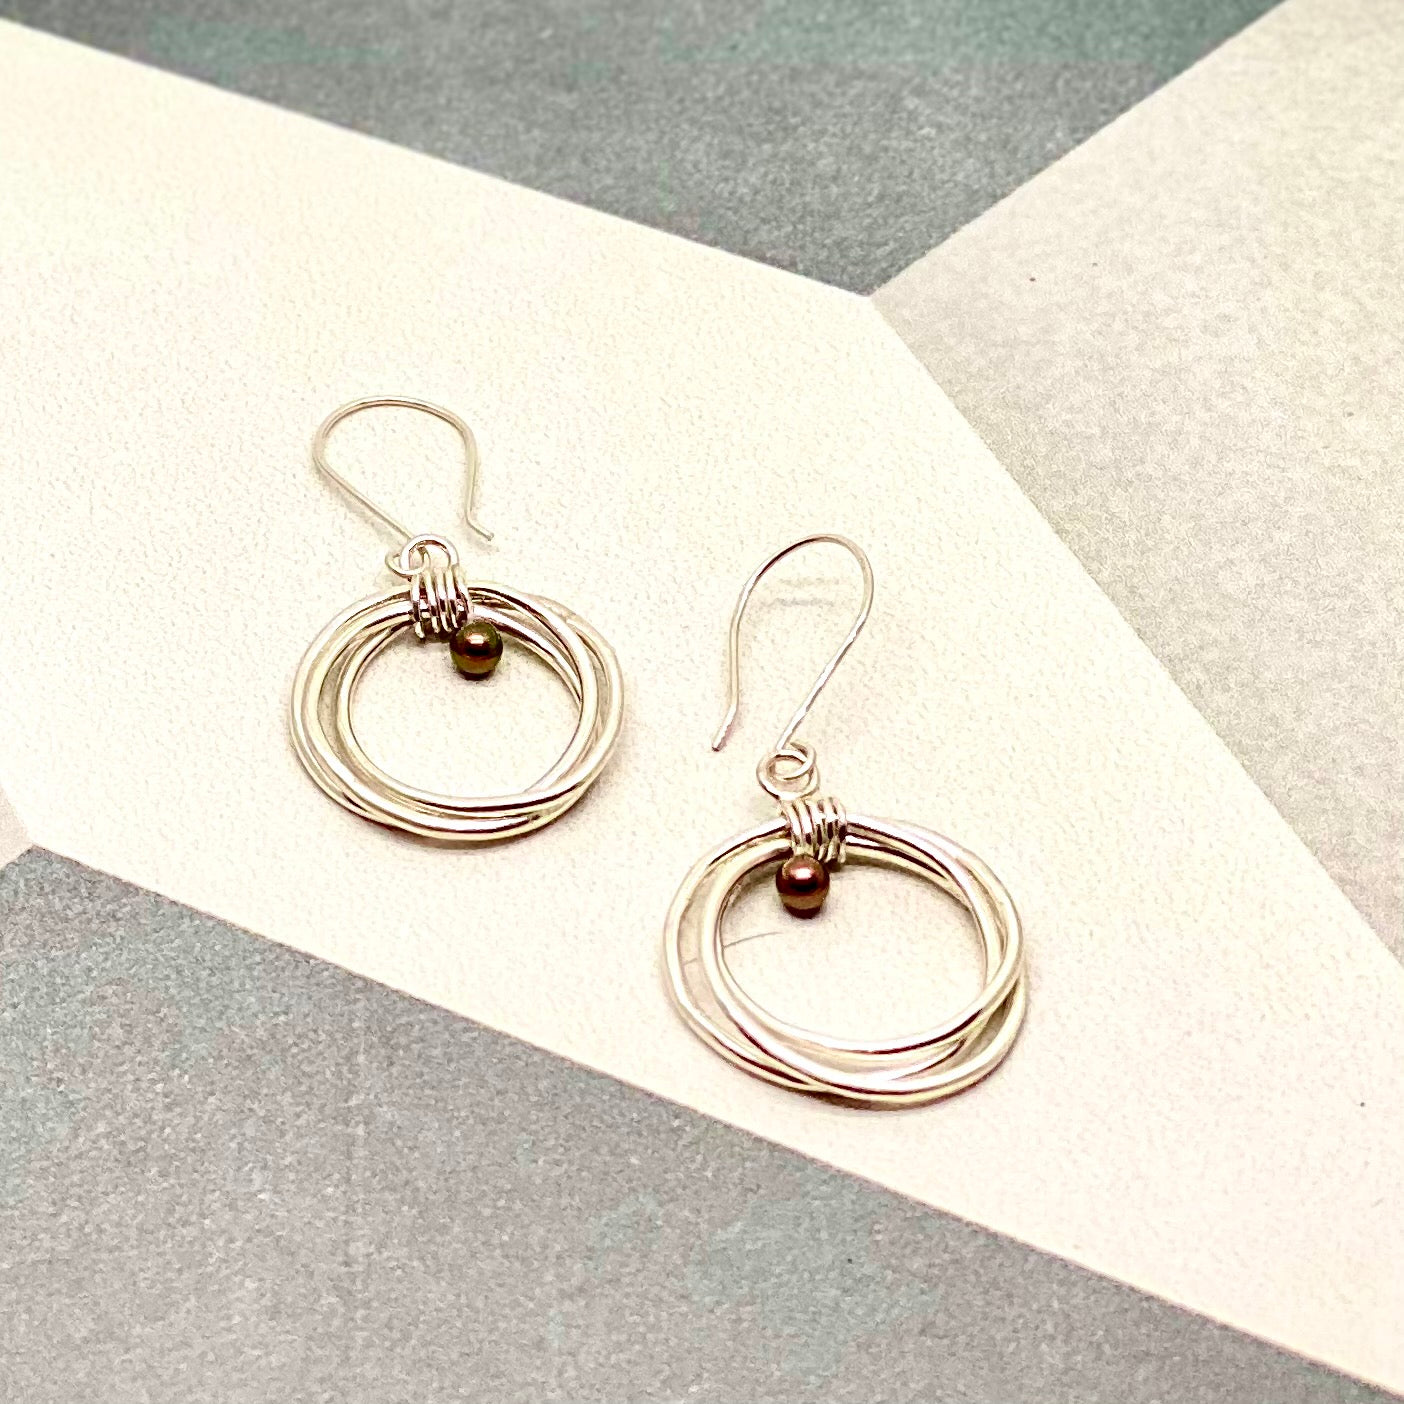 Maven Sterling Silver Mobius Ring Earrings with Peacock Freshwater Pearls